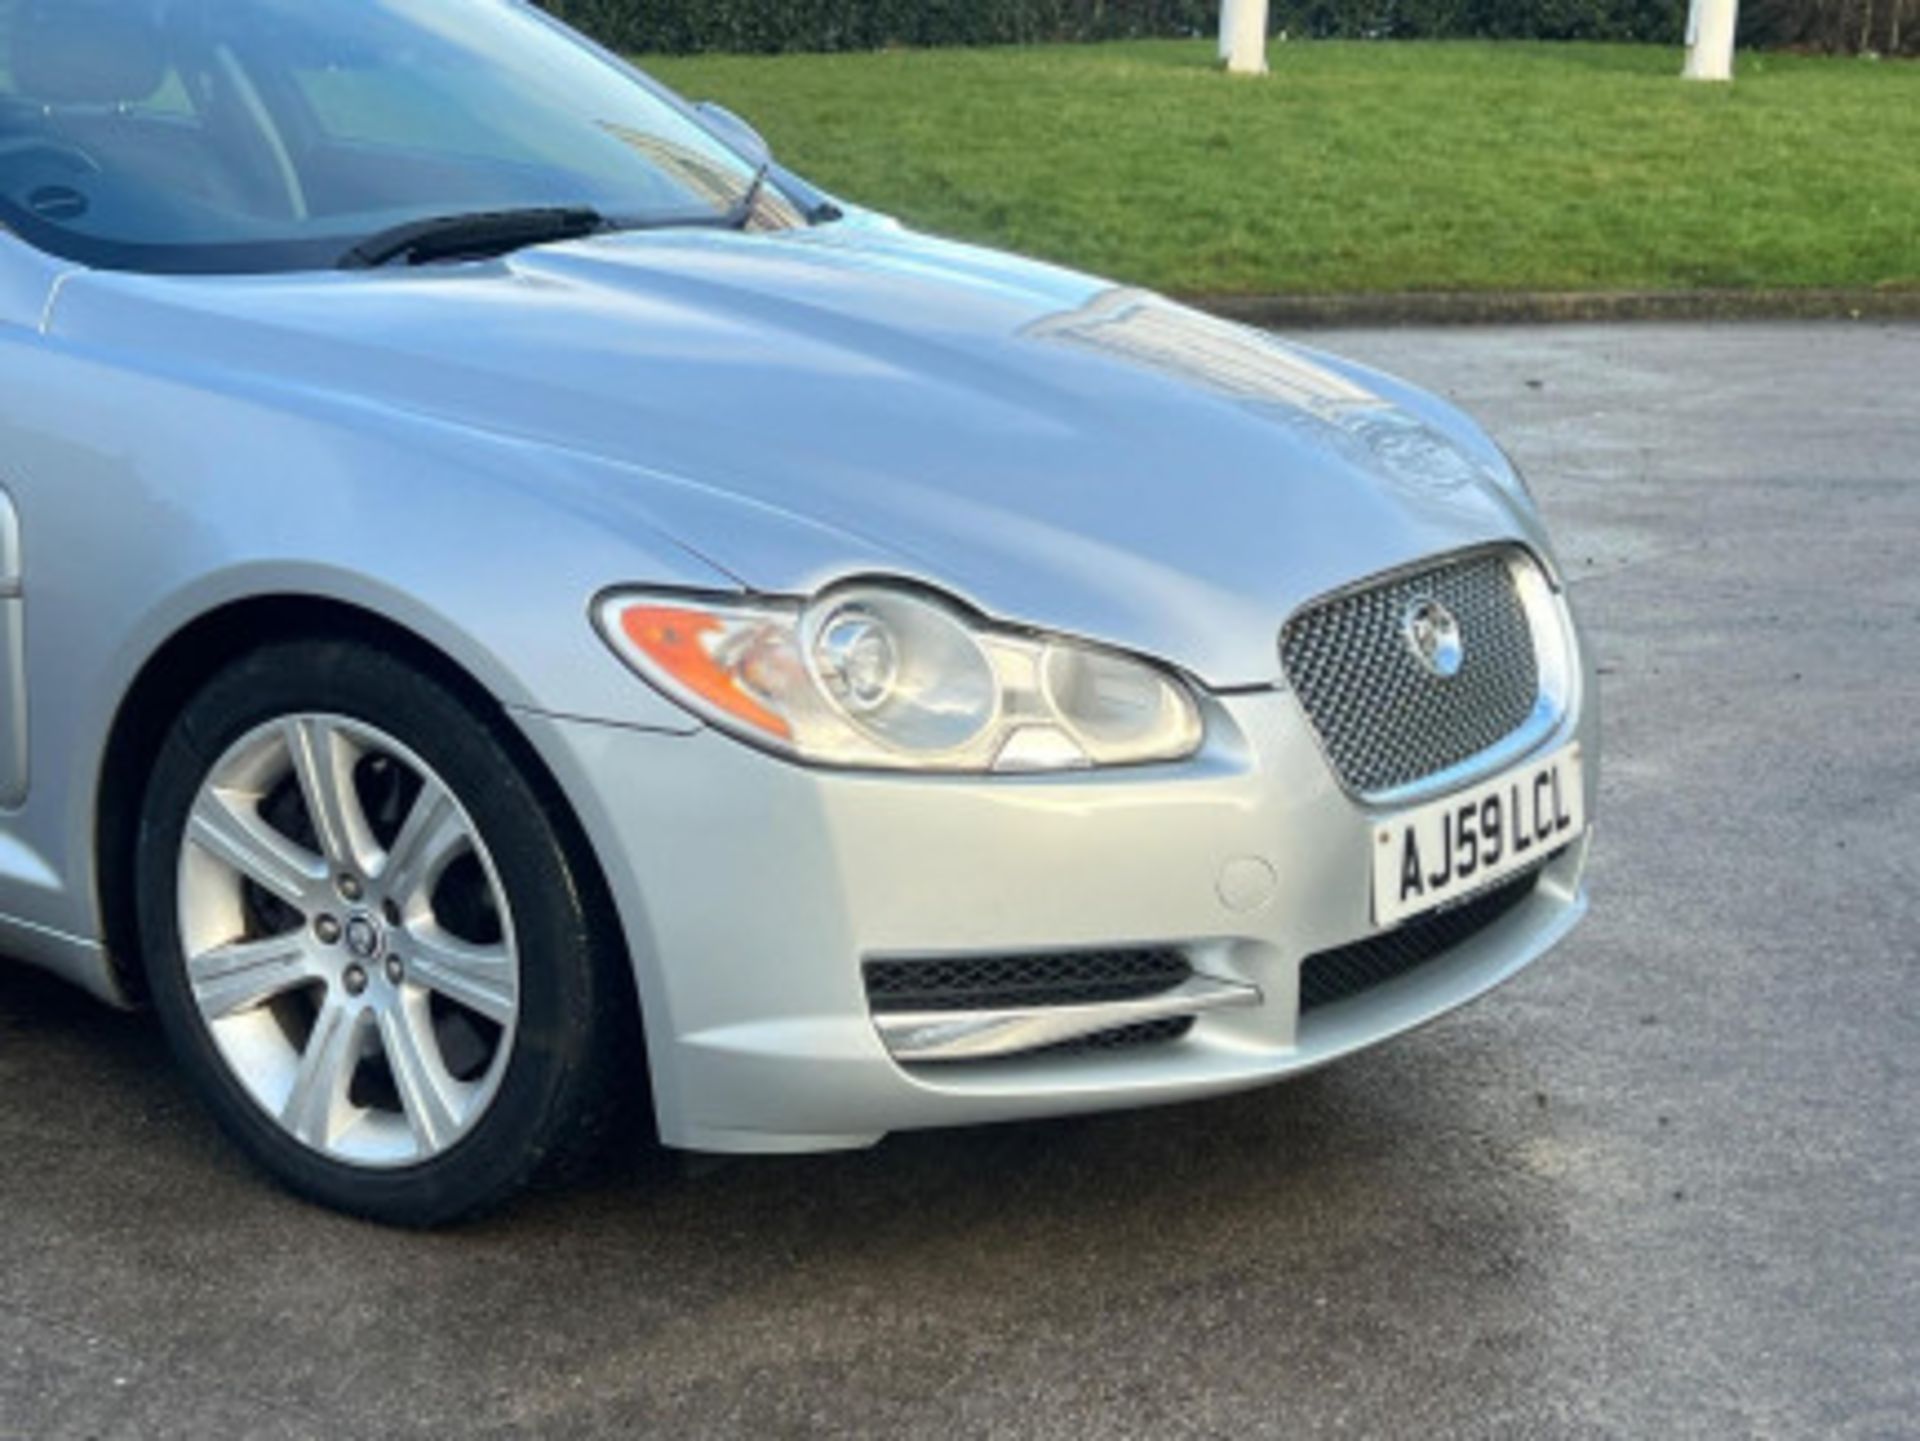 LUXURIOUS JAGUAR XF 3.0D V6 LUXURY 4DR AUTOMATIC SALOON >>--NO VAT ON HAMMER--<< - Image 31 of 80